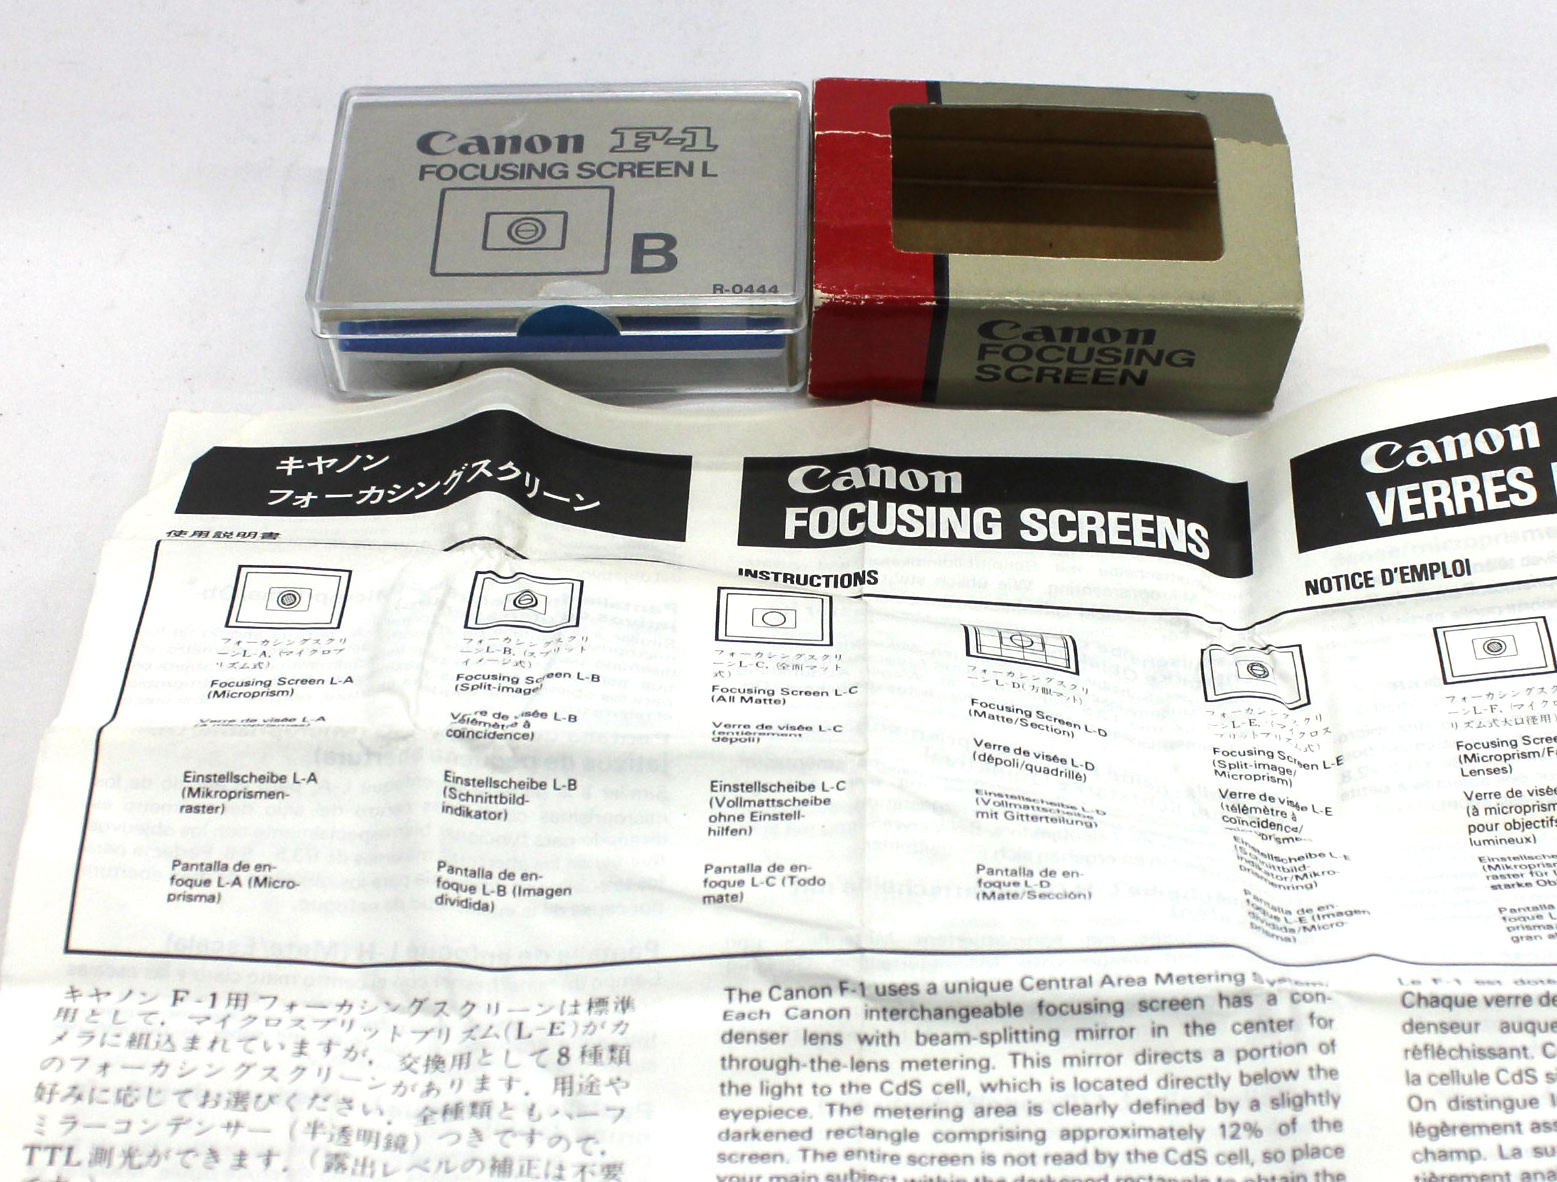 [Excellent+++++] Canon Focusing Screen L Type B Split-Image for F1 SLR Camera from Japan